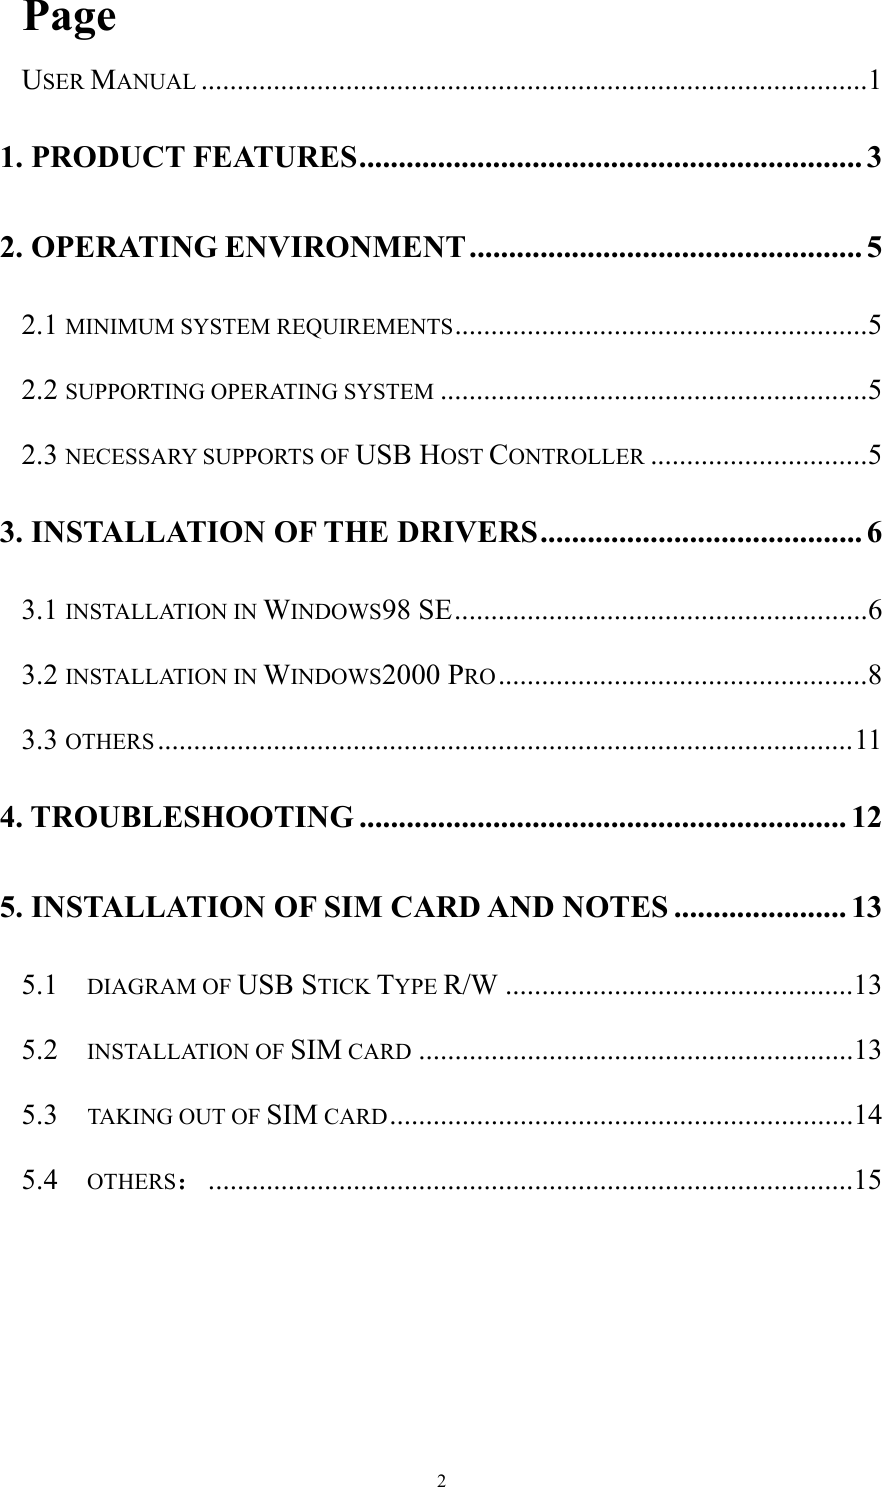  2 Page USER MANUAL ............................................................................................1 1. PRODUCT FEATURES................................................................ 3 2. OPERATING ENVIRONMENT.................................................. 5 2.1 MINIMUM SYSTEM REQUIREMENTS.........................................................5 2.2 SUPPORTING OPERATING SYSTEM ...........................................................5 2.3 NECESSARY SUPPORTS OF USB HOST CONTROLLER ..............................5 3. INSTALLATION OF THE DRIVERS......................................... 6 3.1 INSTALLATION IN WINDOWS98 SE.........................................................6 3.2 INSTALLATION IN WINDOWS2000 PRO...................................................8 3.3 OTHERS ................................................................................................11 4. TROUBLESHOOTING .............................................................. 12 5. INSTALLATION OF SIM CARD AND NOTES ...................... 13 5.1  DIAGRAM OF USB STICK TYPE R/W ................................................13 5.2  INSTALLATION OF SIM CARD ............................................................13 5.3  TAKING OUT OF SIM CARD................................................................14 5.4  OTHERS：.........................................................................................15  